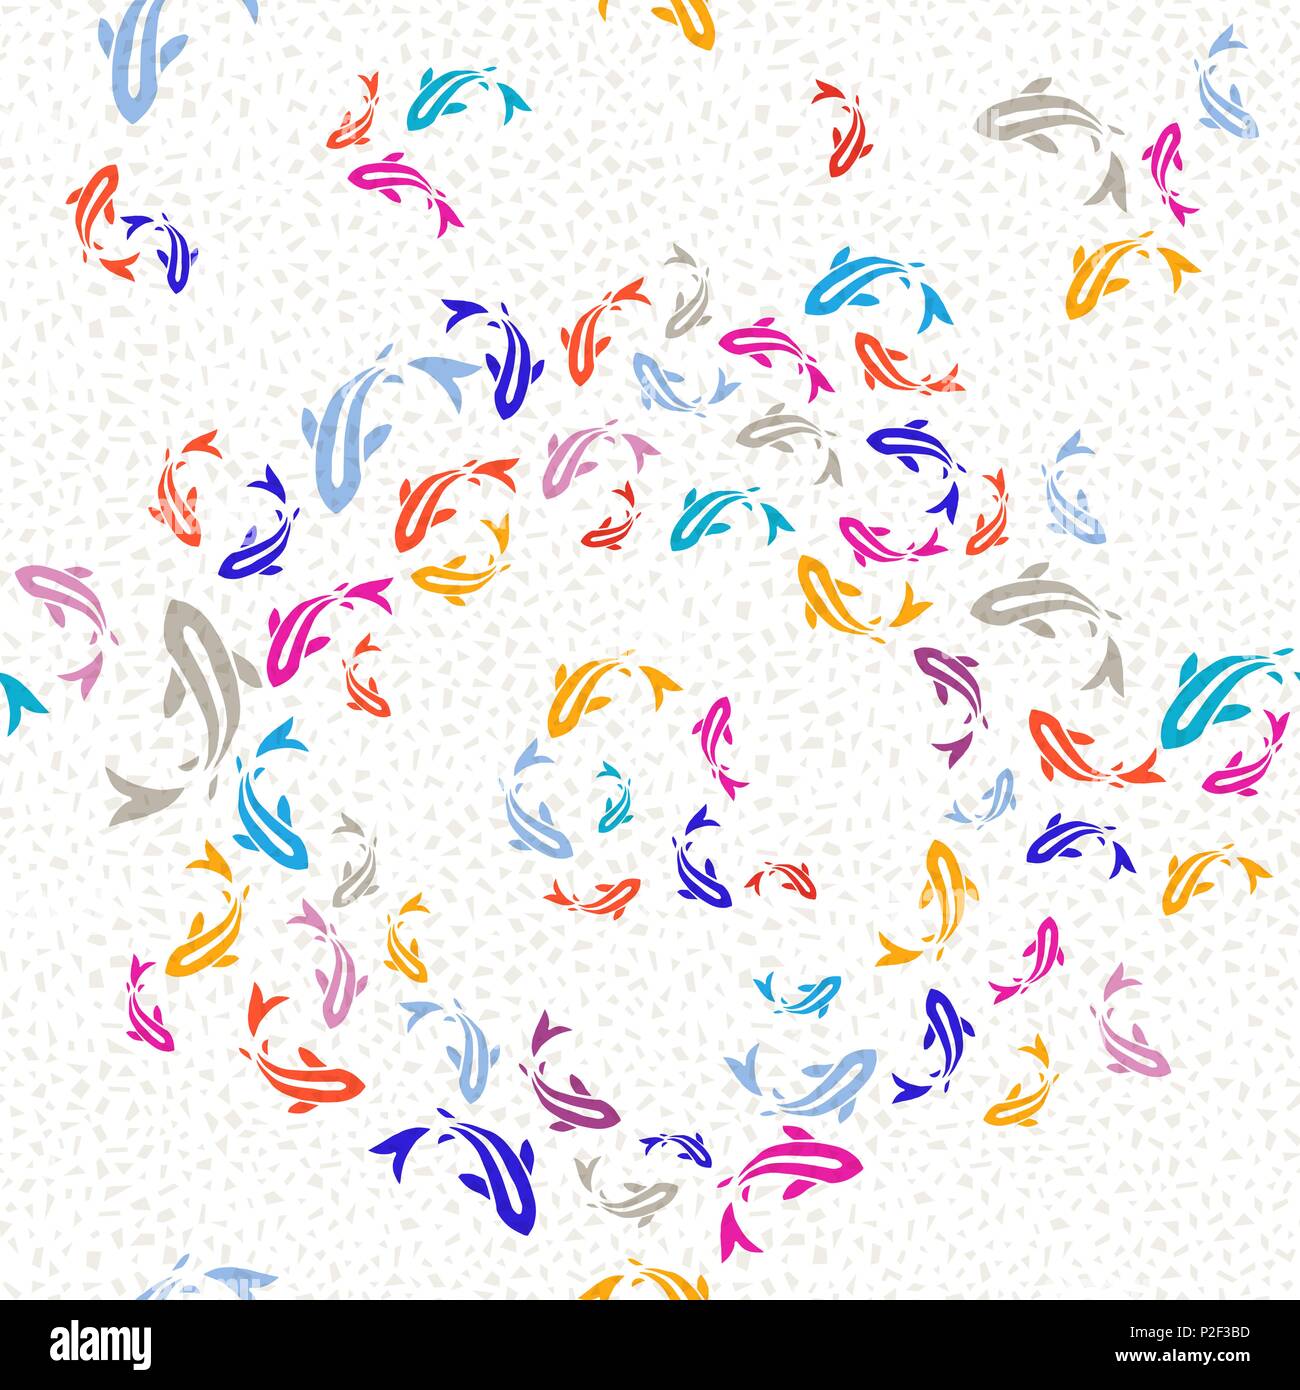 Koi fish seamless pattern, colorful asian style art of carp goldfish swimming in pond. Hand drawn illustration background. EPS10 vector. Stock Vector